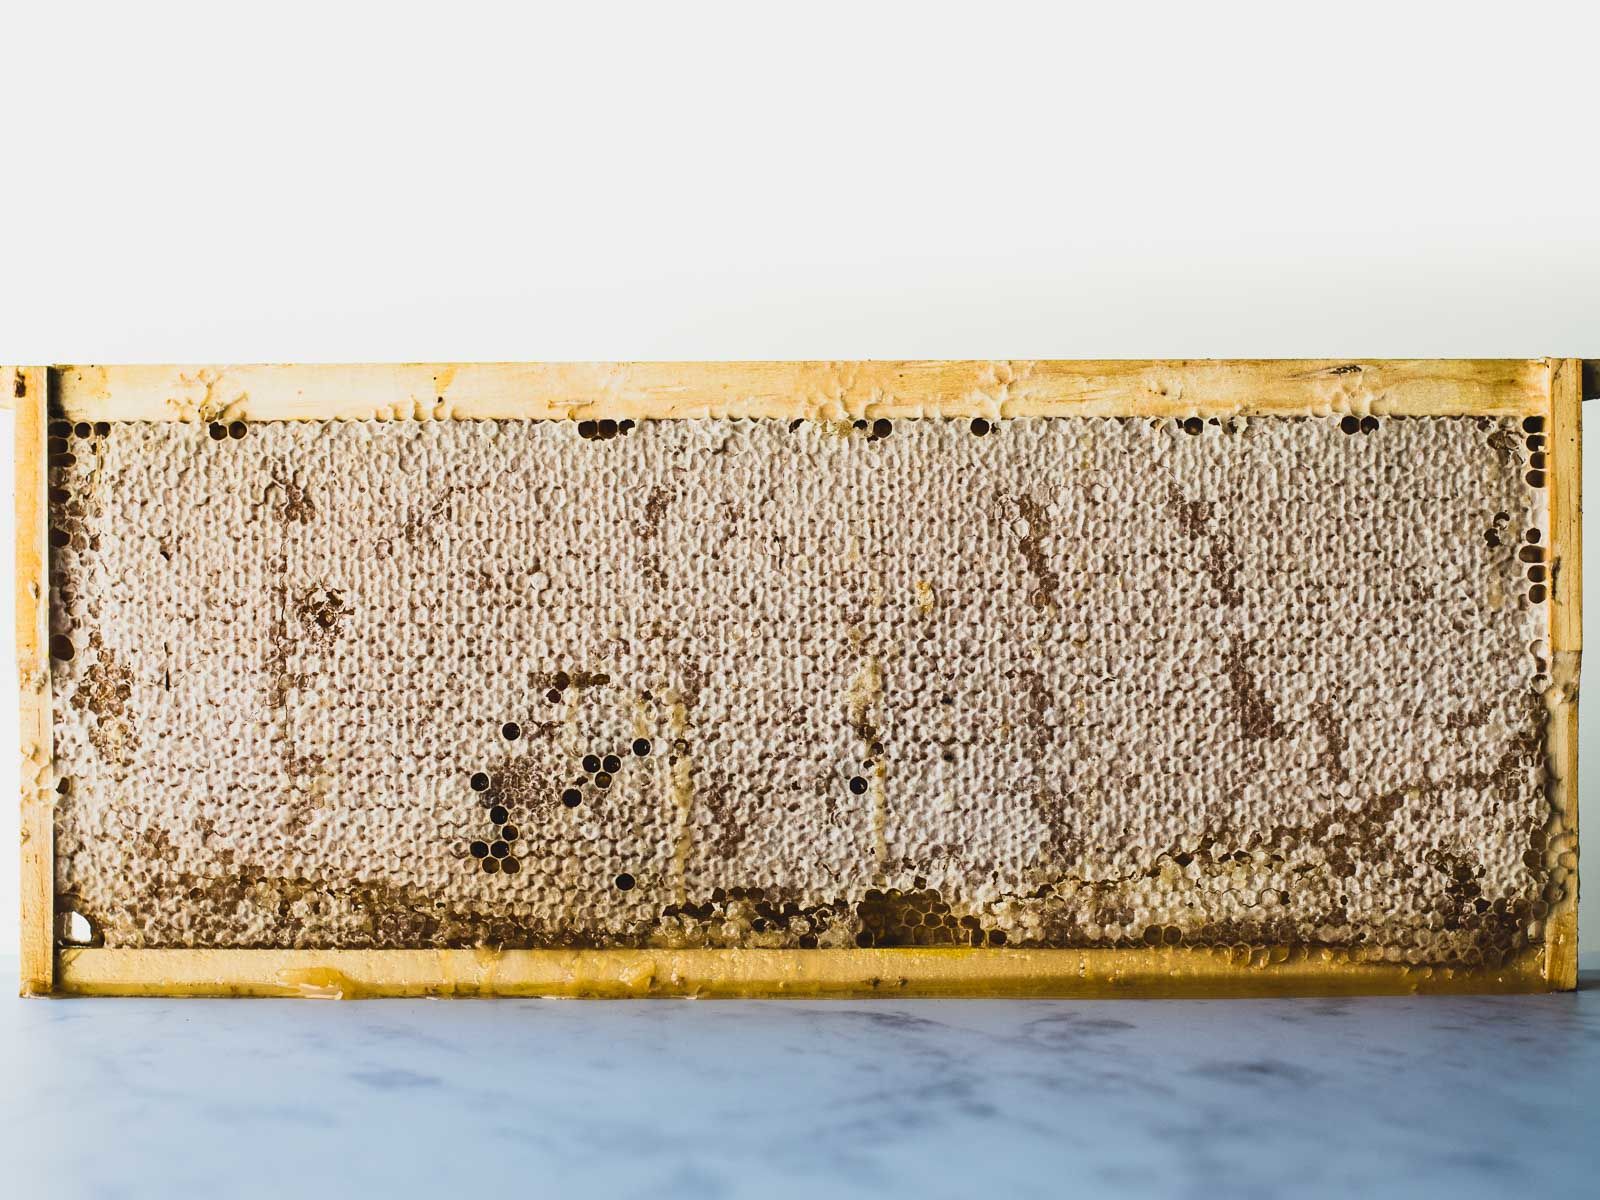 Wooden frame containing a honeycomb